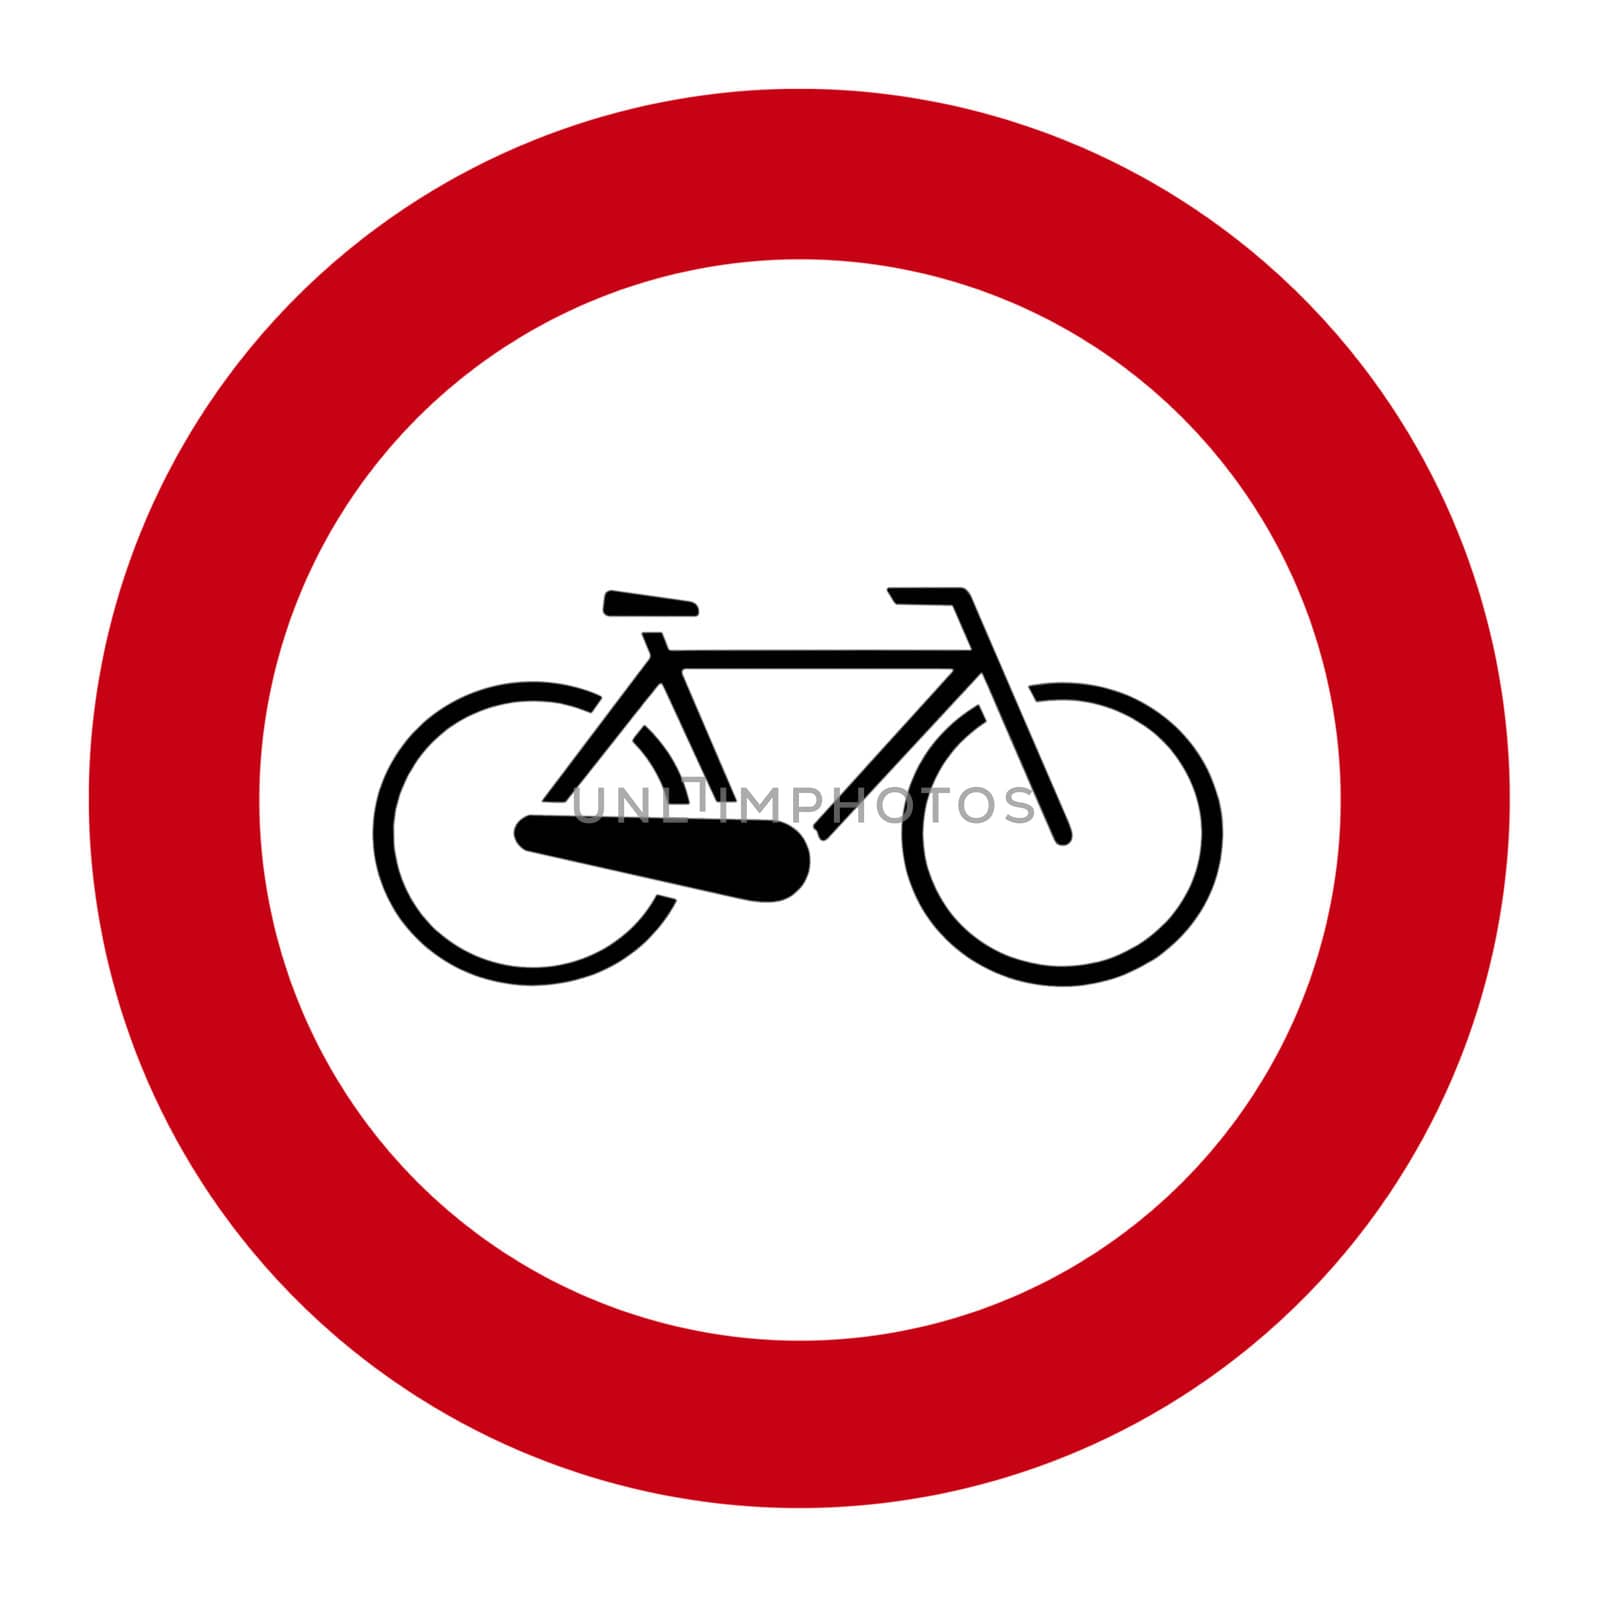 This image shows a information sign from biker